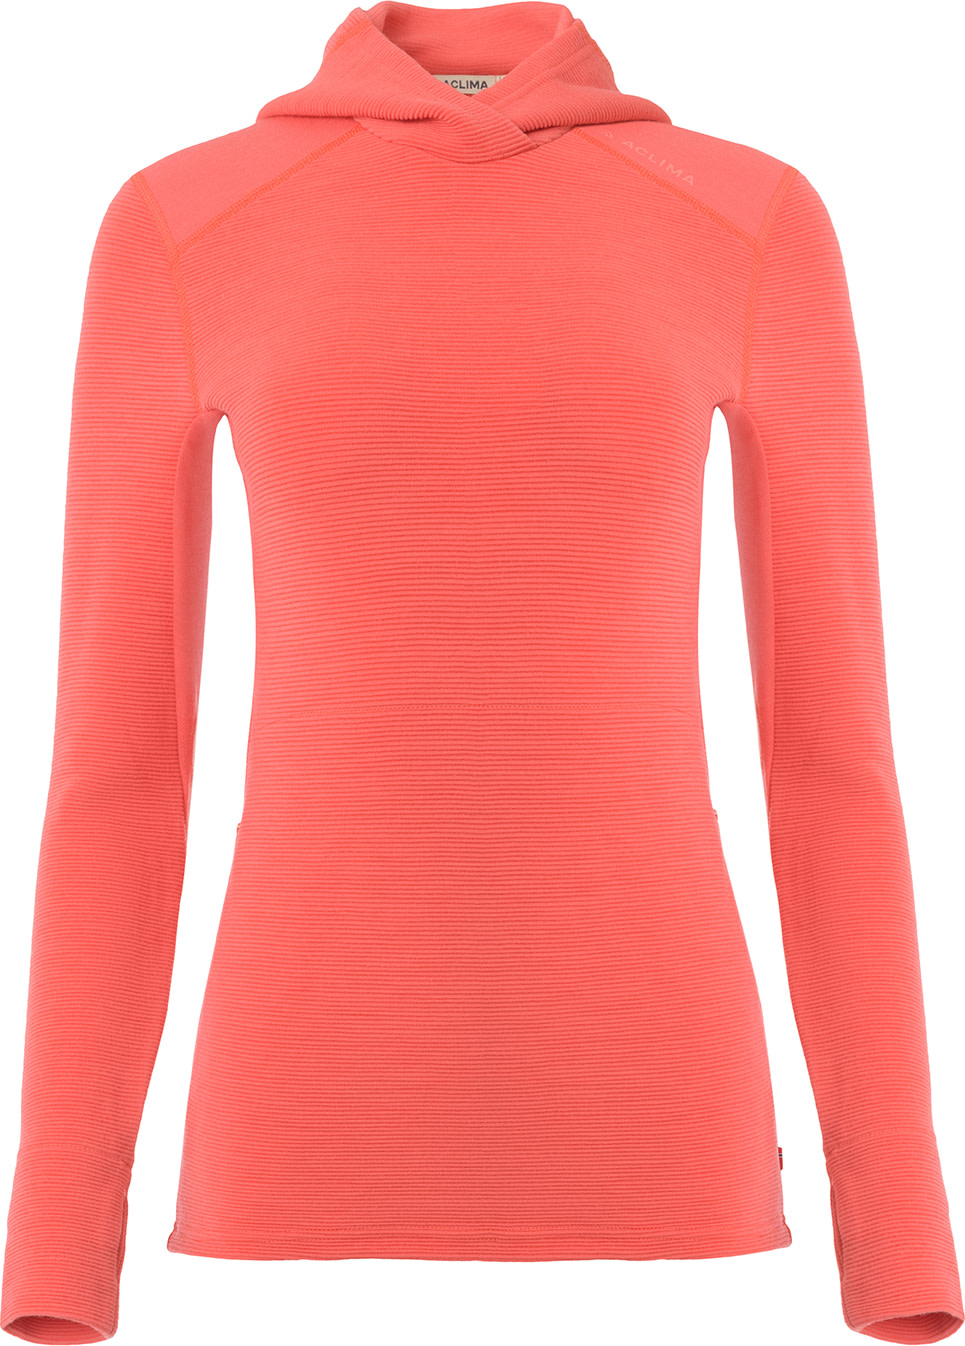 Aclima Women's StreamWool Hoodie Spiced Coral L, Spiced Coral